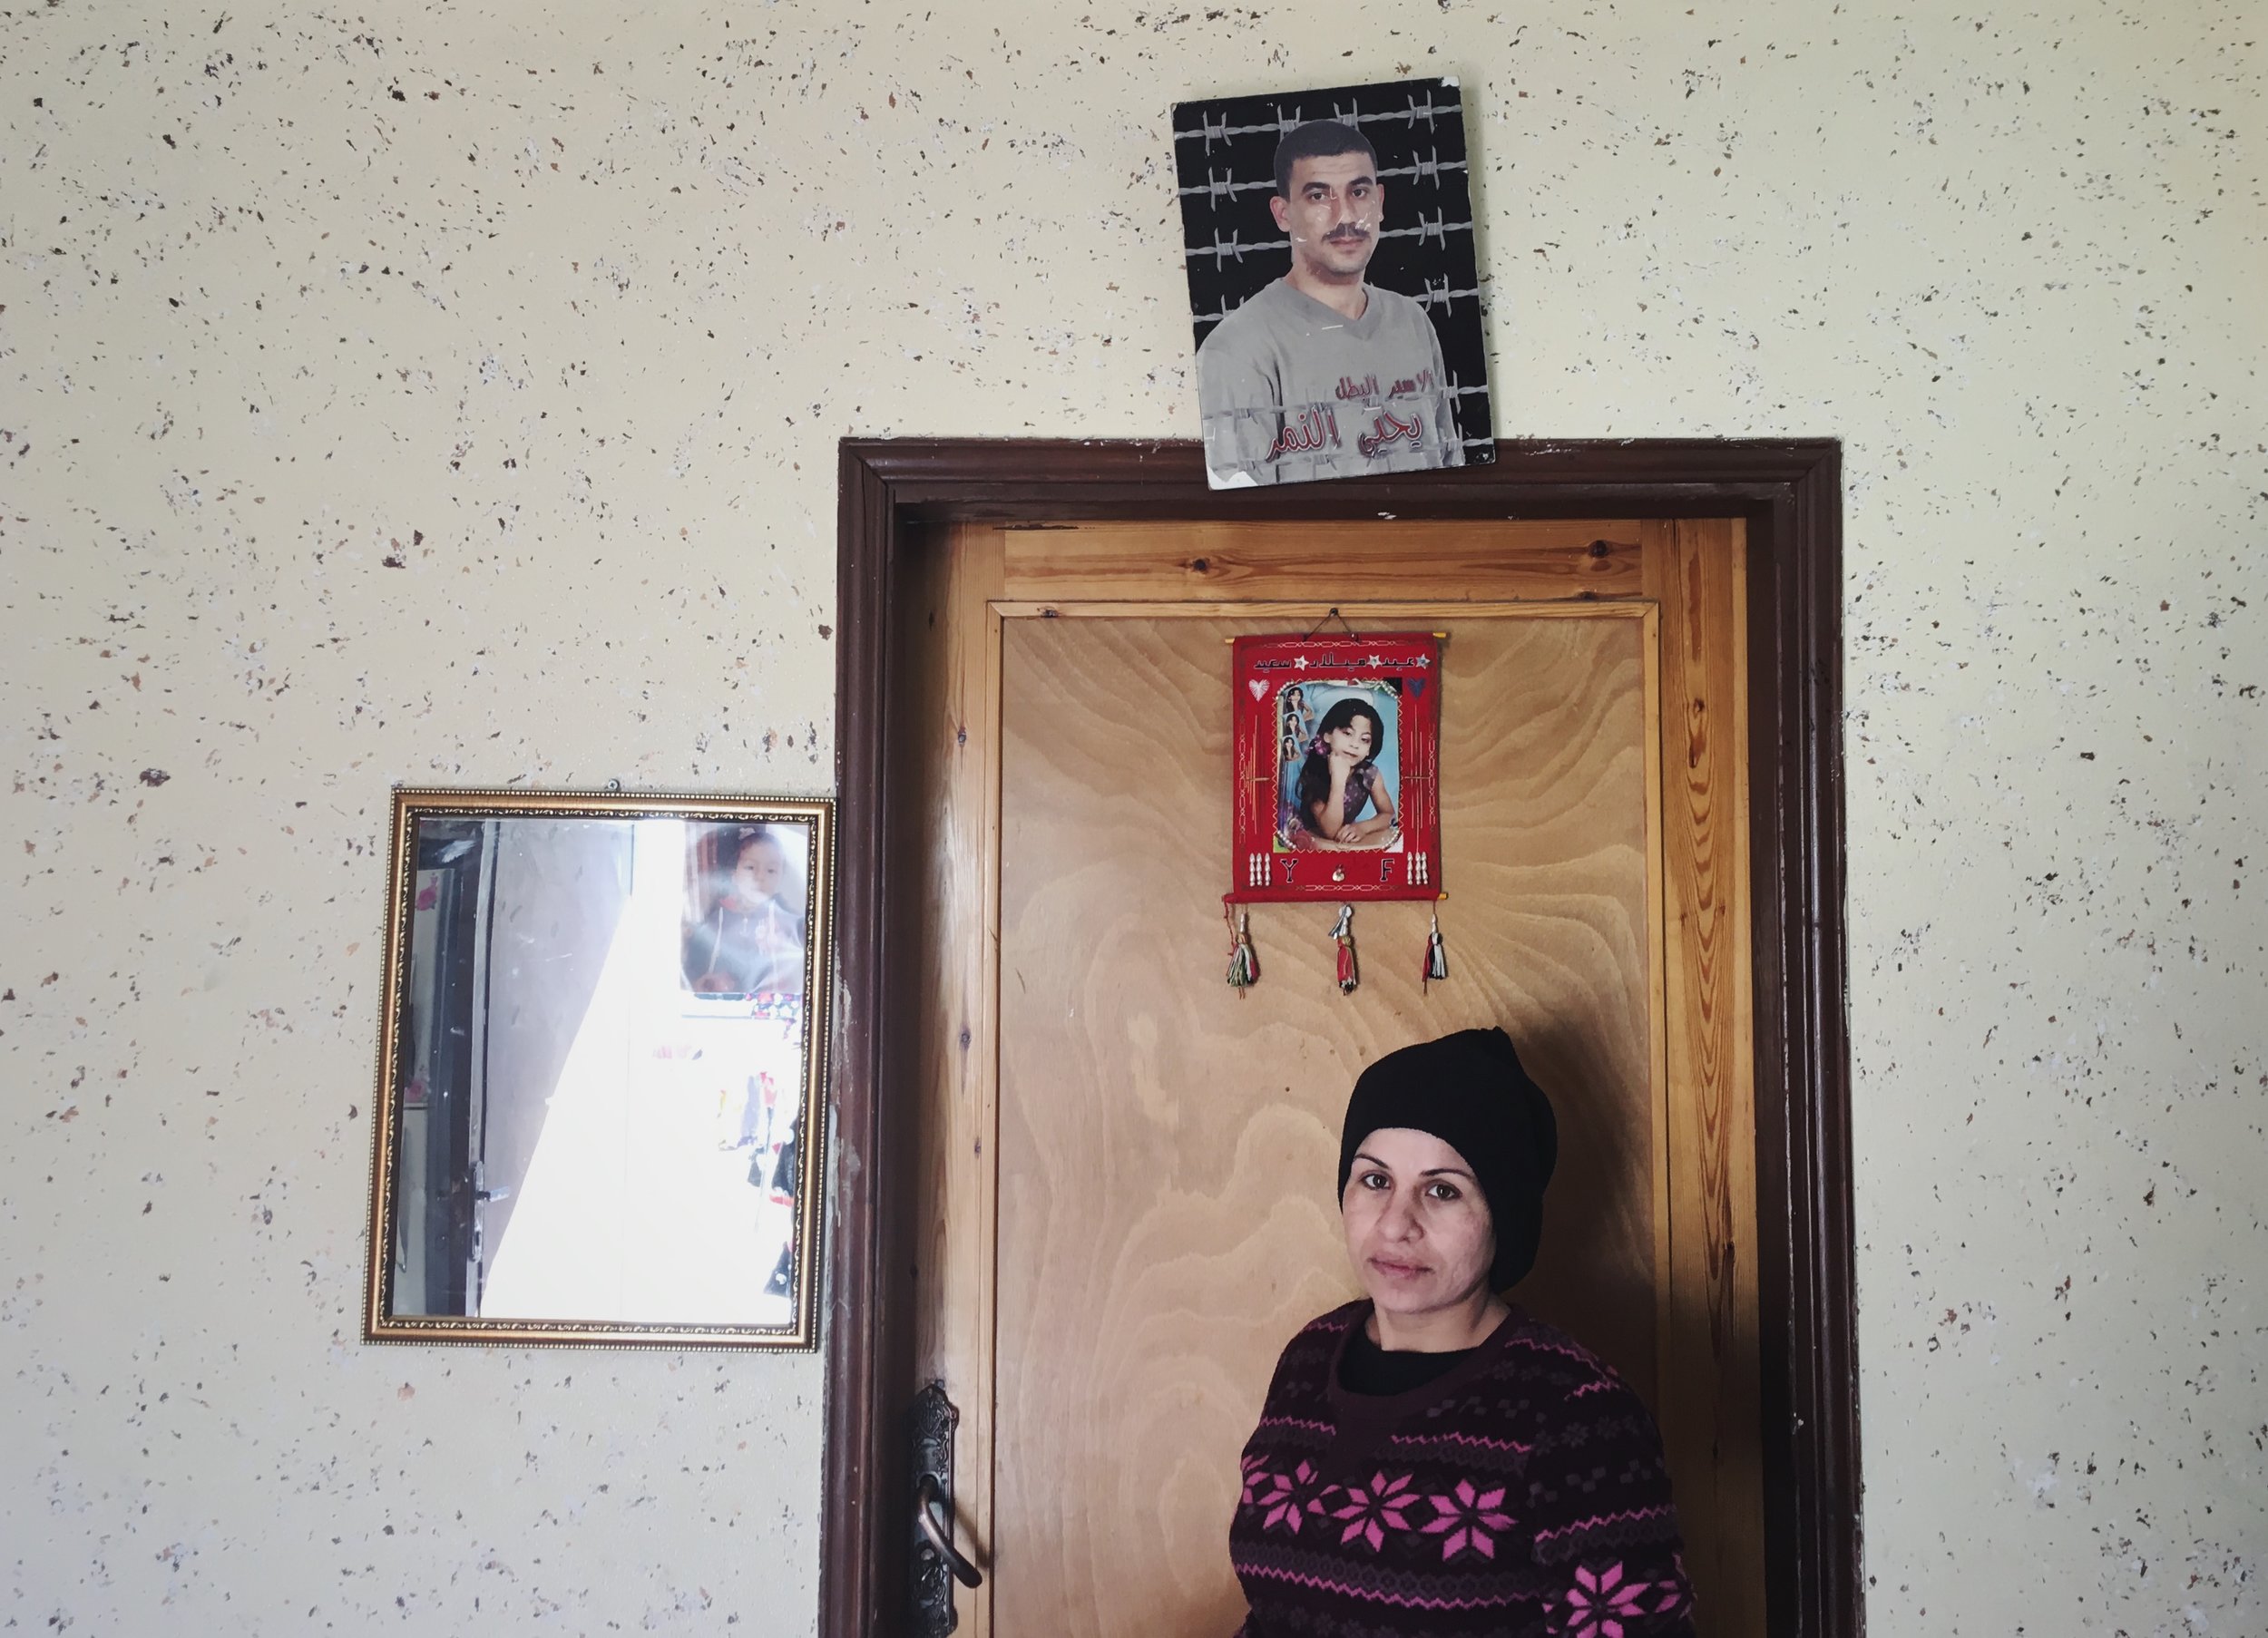  Sameera smuggled her husband's sperm from an Israeli prison. She's standing in her kitchen beneath a photo of her 11 year old daughter who died in a car crash and her husband who's been in prison for 14 years. Story published by Snap Judgment.&nbsp;